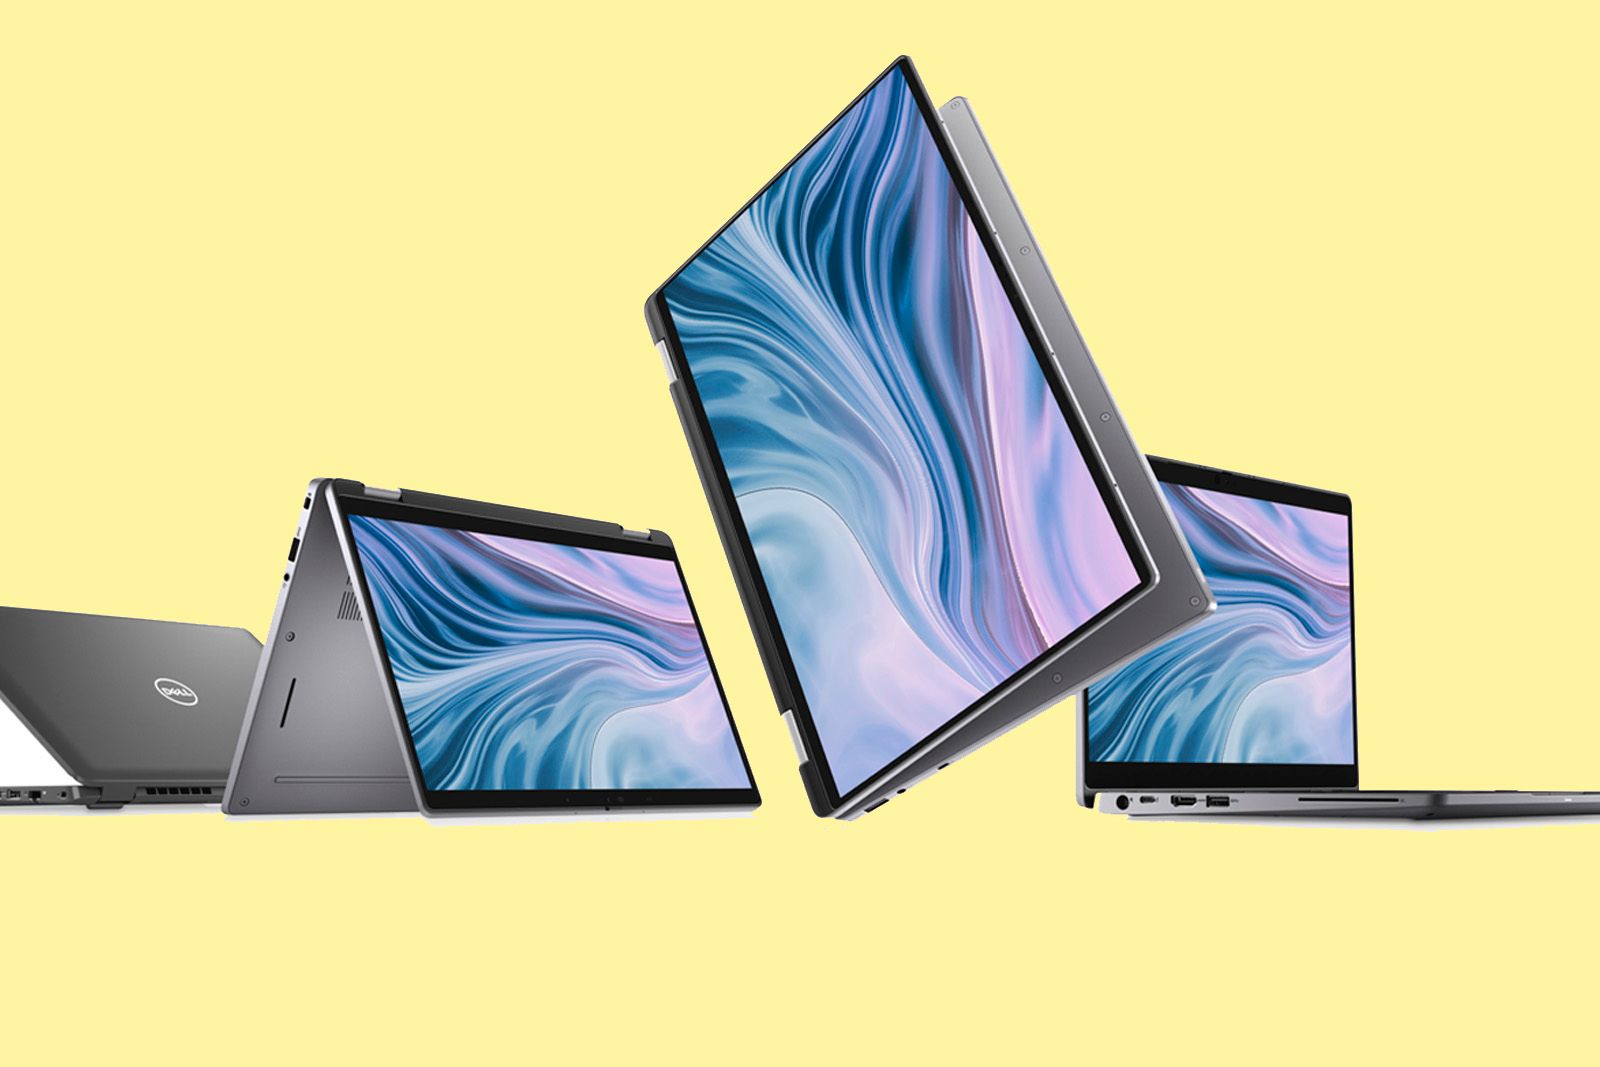 Dell revamps the Latitude laptop series with over 30 hours of battery life image 1